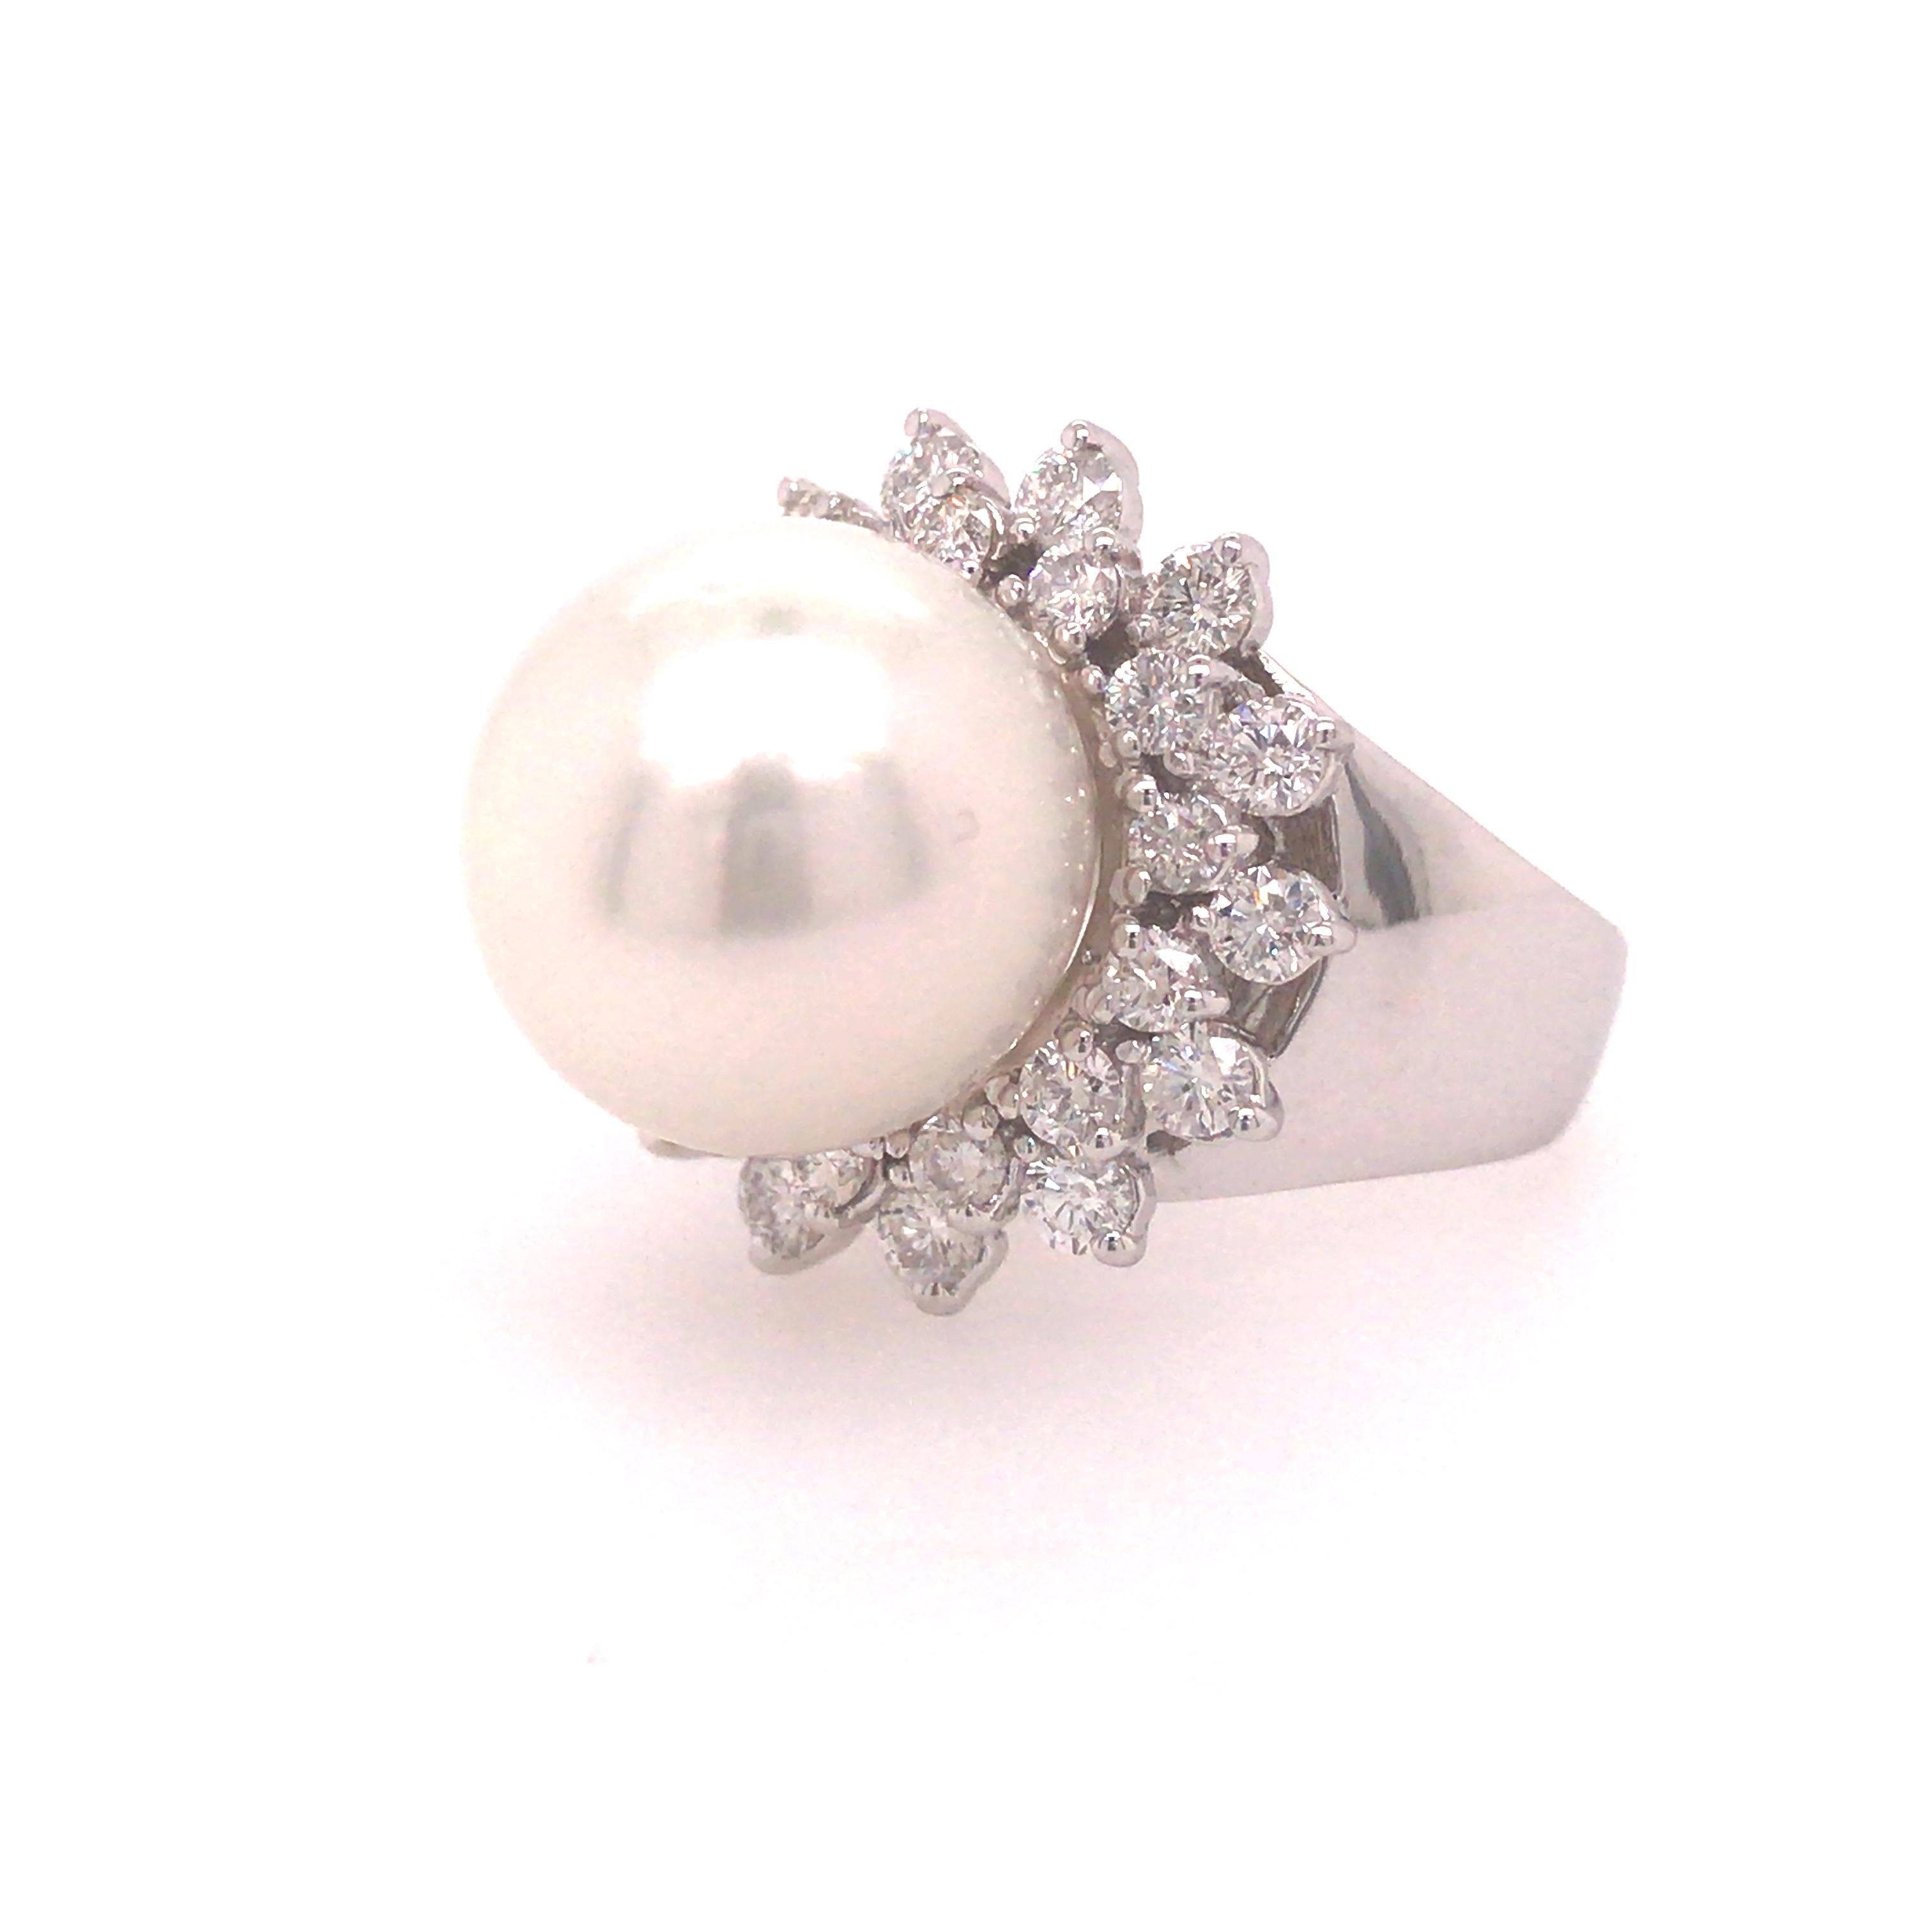 Platinum Diamond Halo 13mm Pearl Ring.  Round Brilliant Cut Diamonds weighing 1.82 carat total weight, G-H in color and VS-SI in clarity are expertly set.  The Halo measures 1/3/16 inch in length and 3/4 inch in width.  Ring size 7 1/2.  9.64 grams.